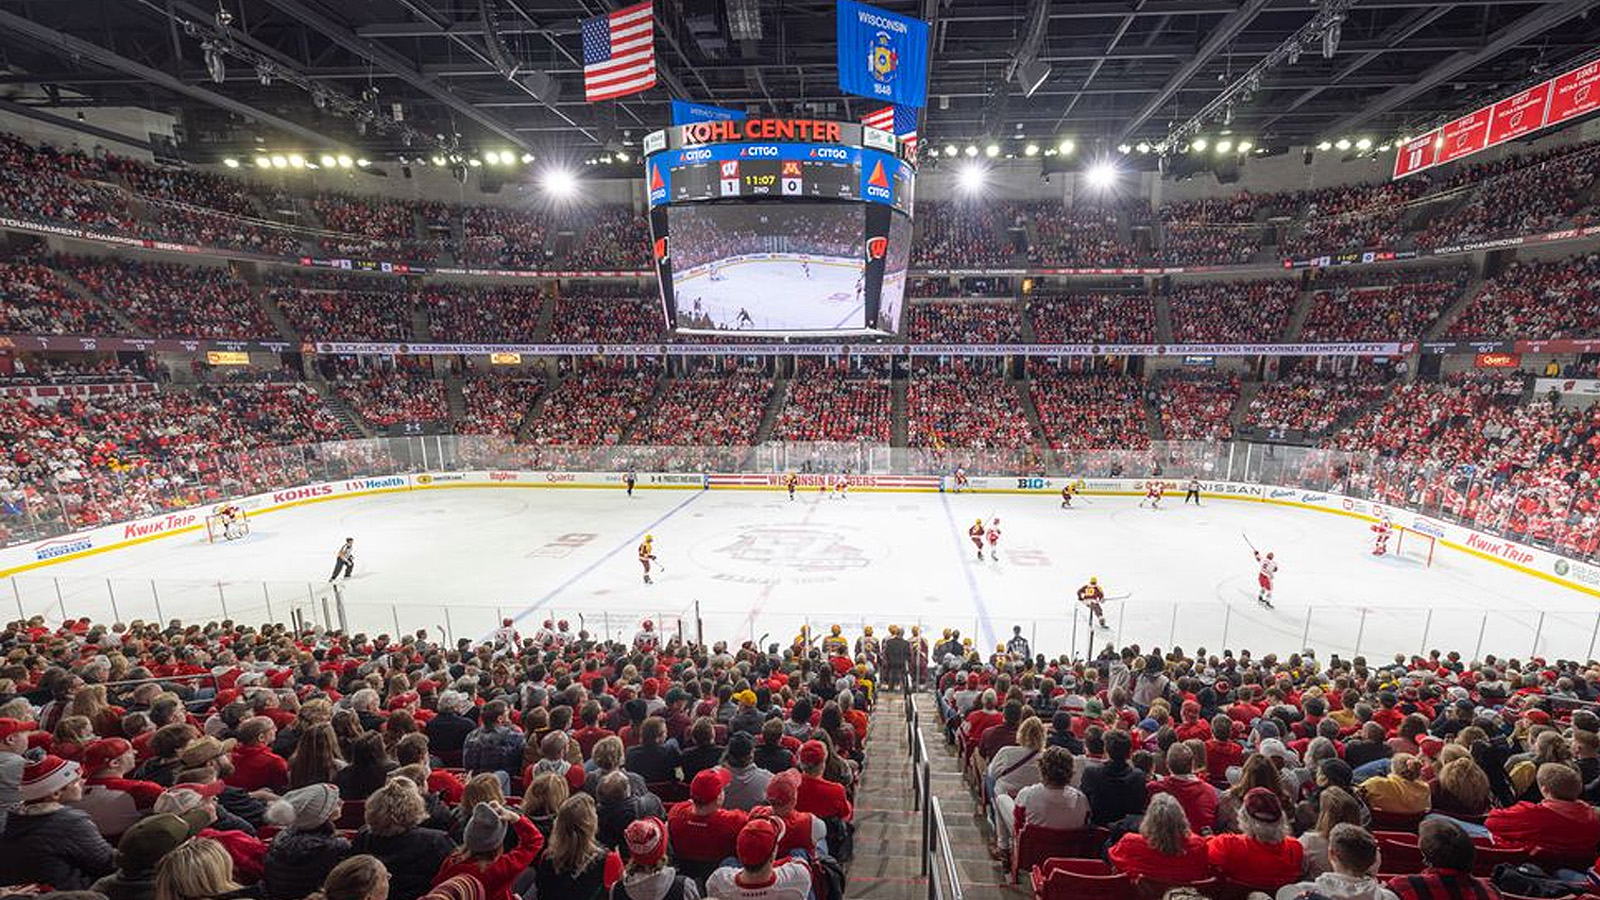 Crowds continue to grow in NCAA Division I men's hockey